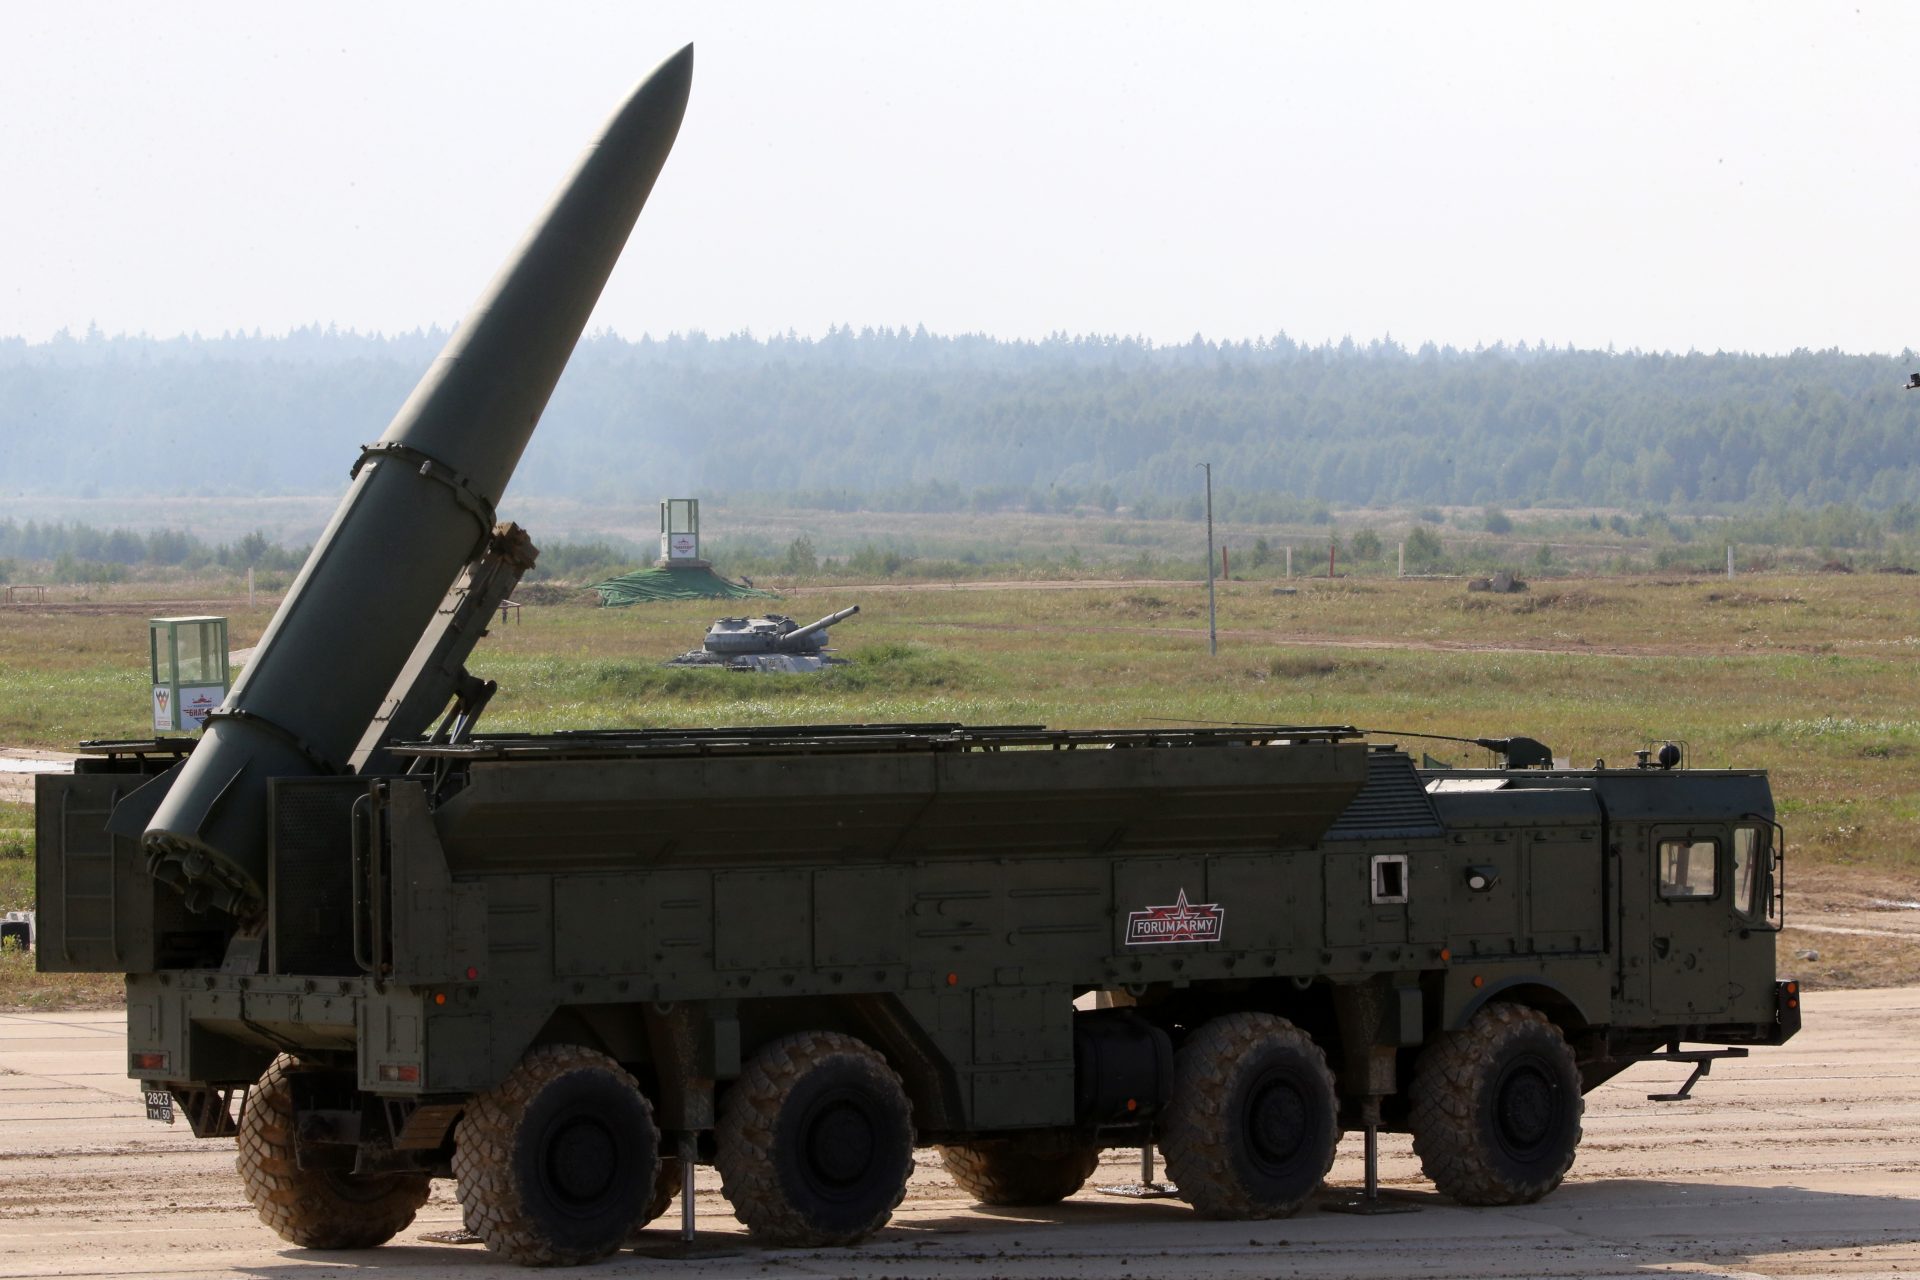 Russia's latest attack with Iskander missiles follows a deadly pattern